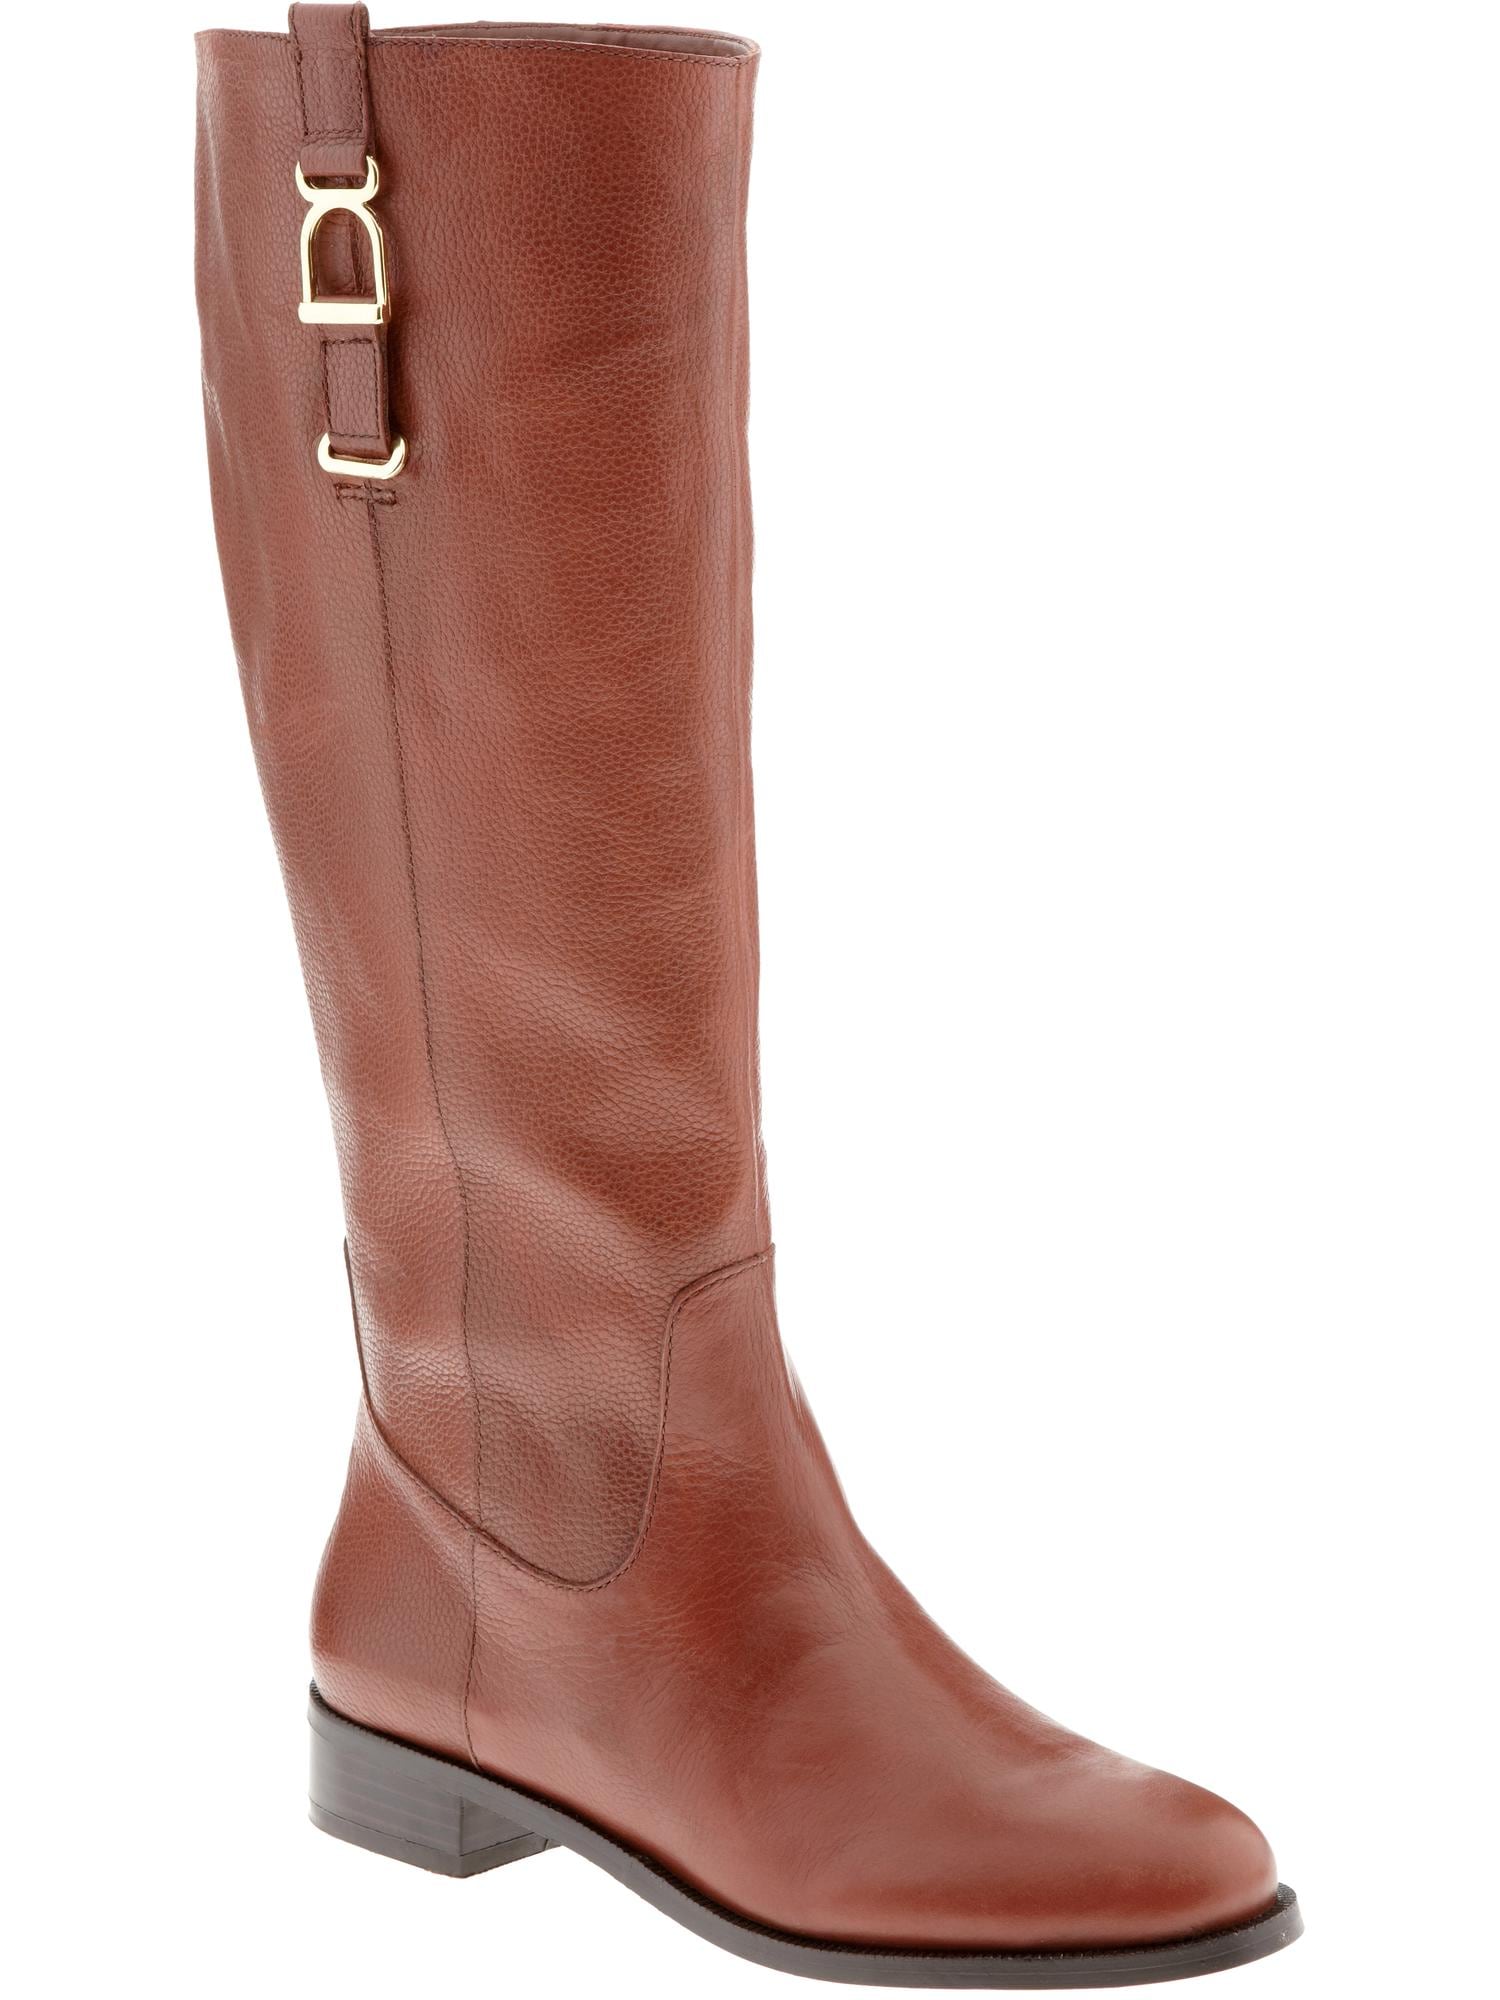 Willow riding boot